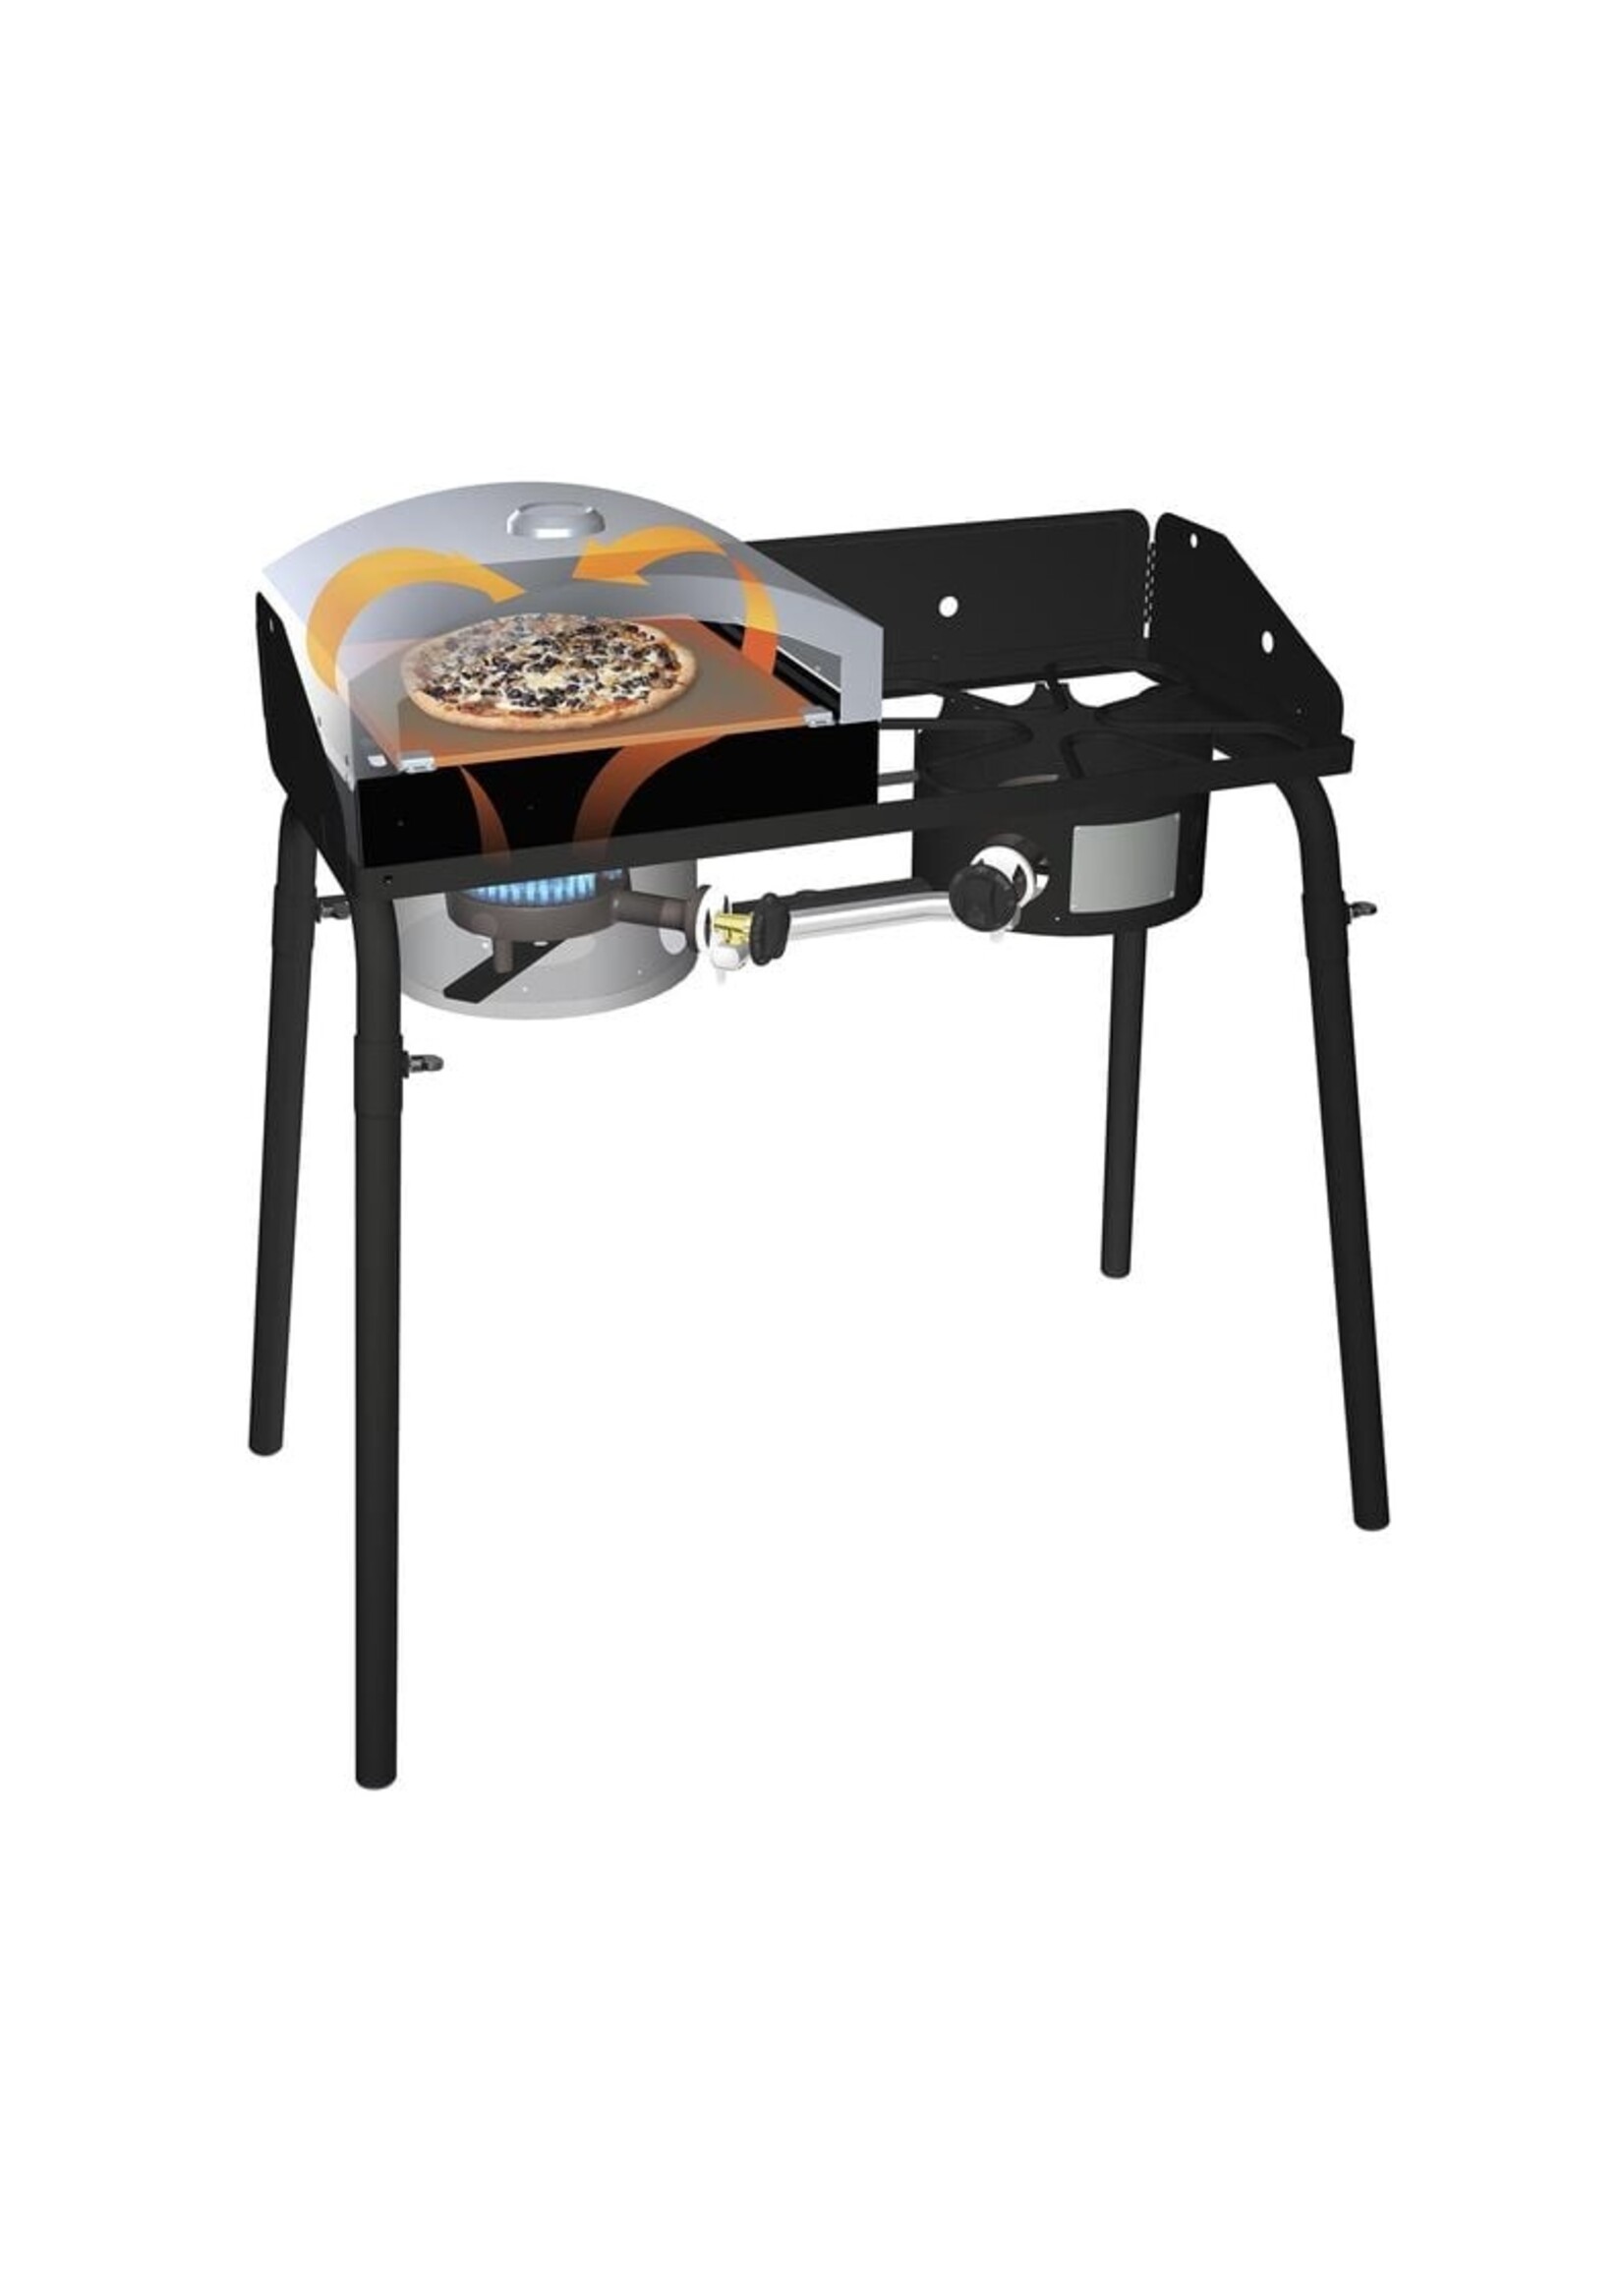 Camp Chef Camp Chef 14" Artisan Outdoor Oven